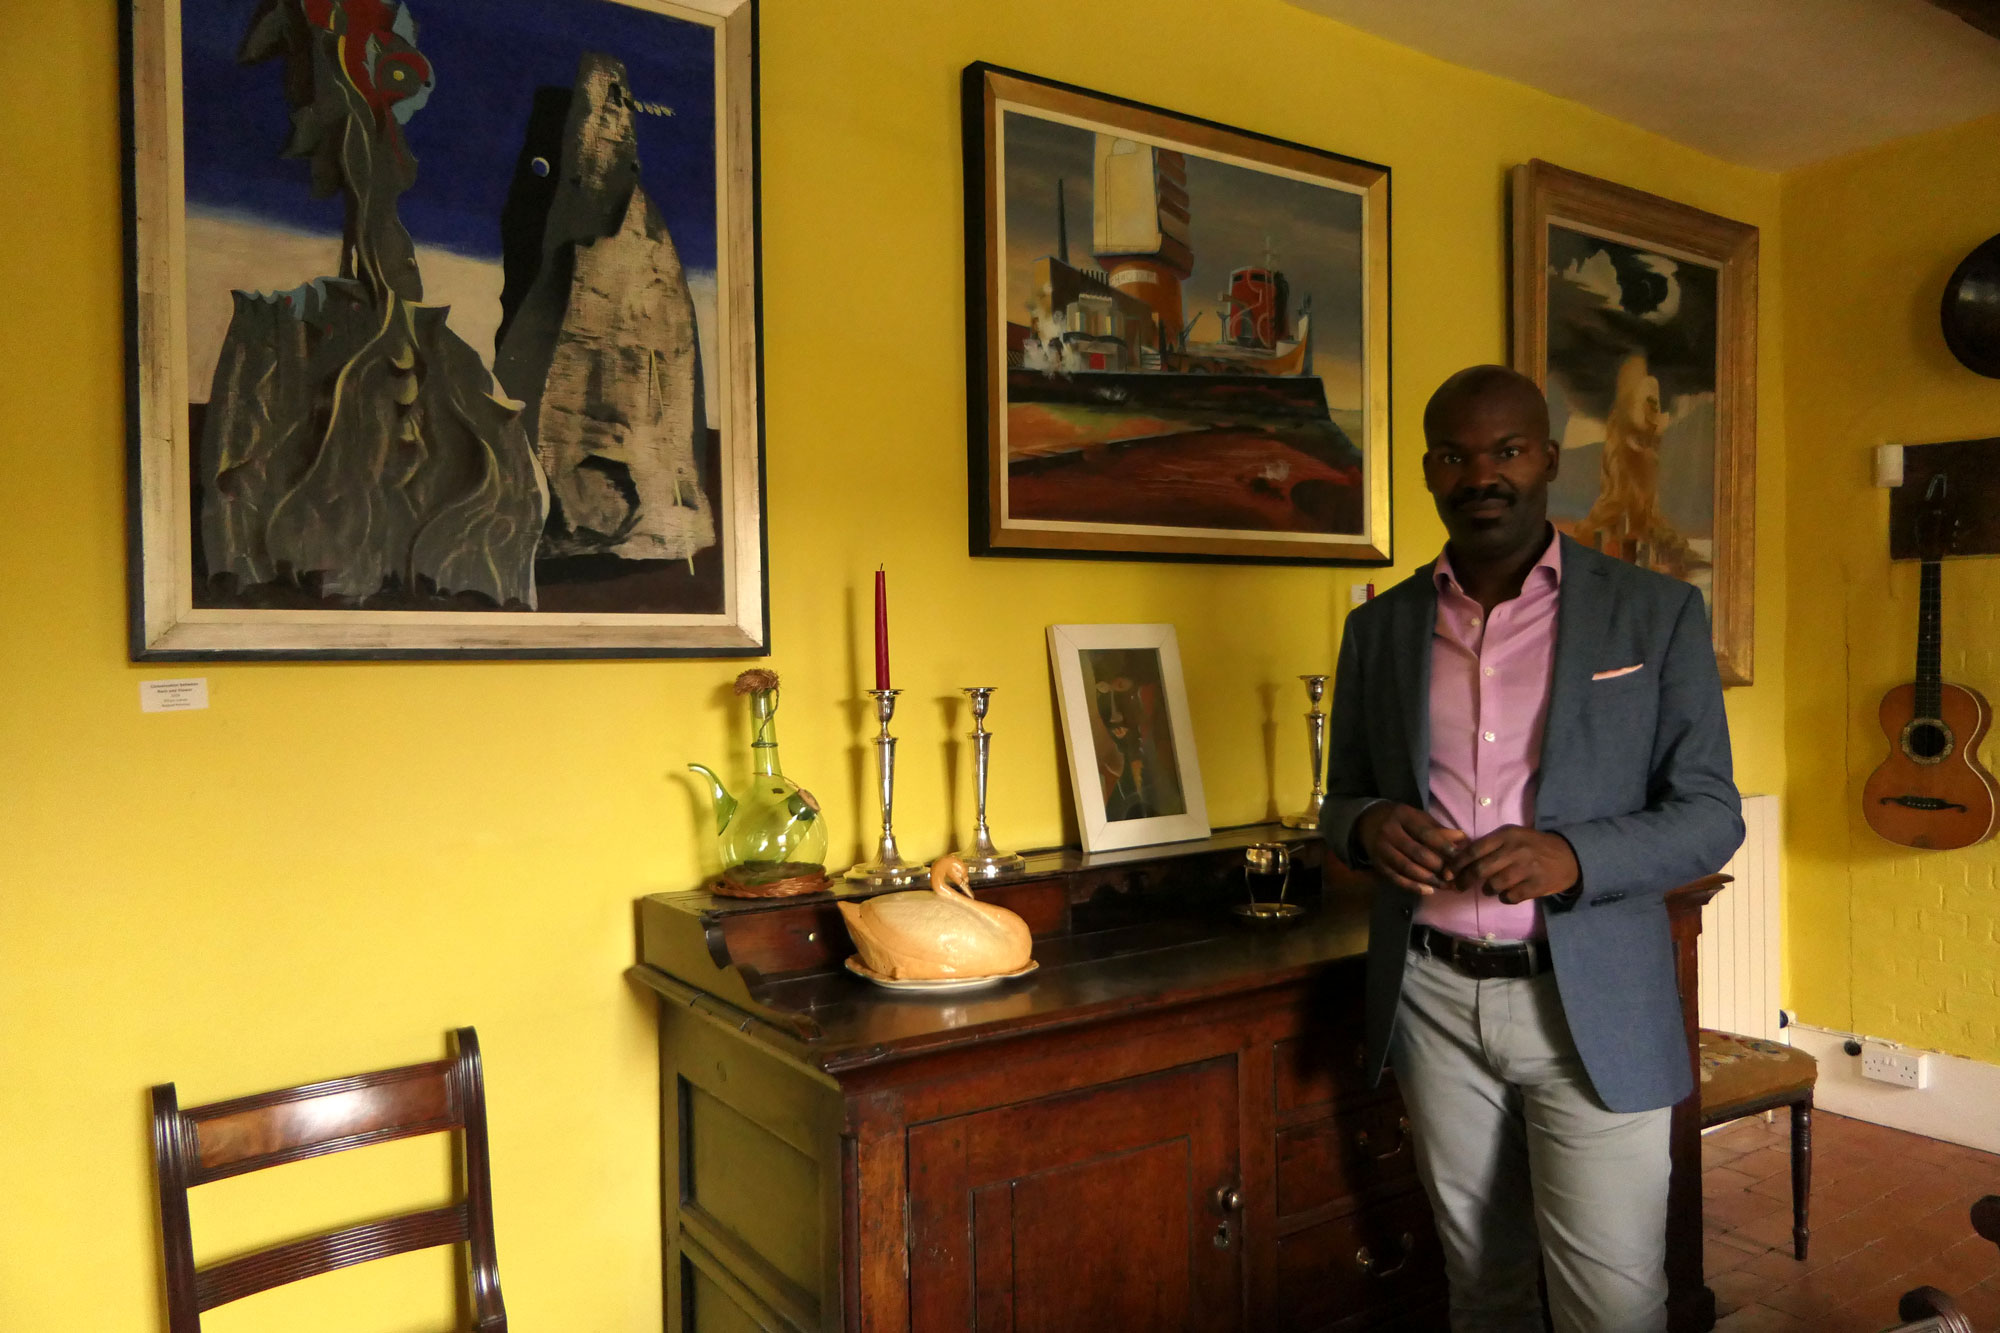 A man stands in a yellow room hung with framed works of art.